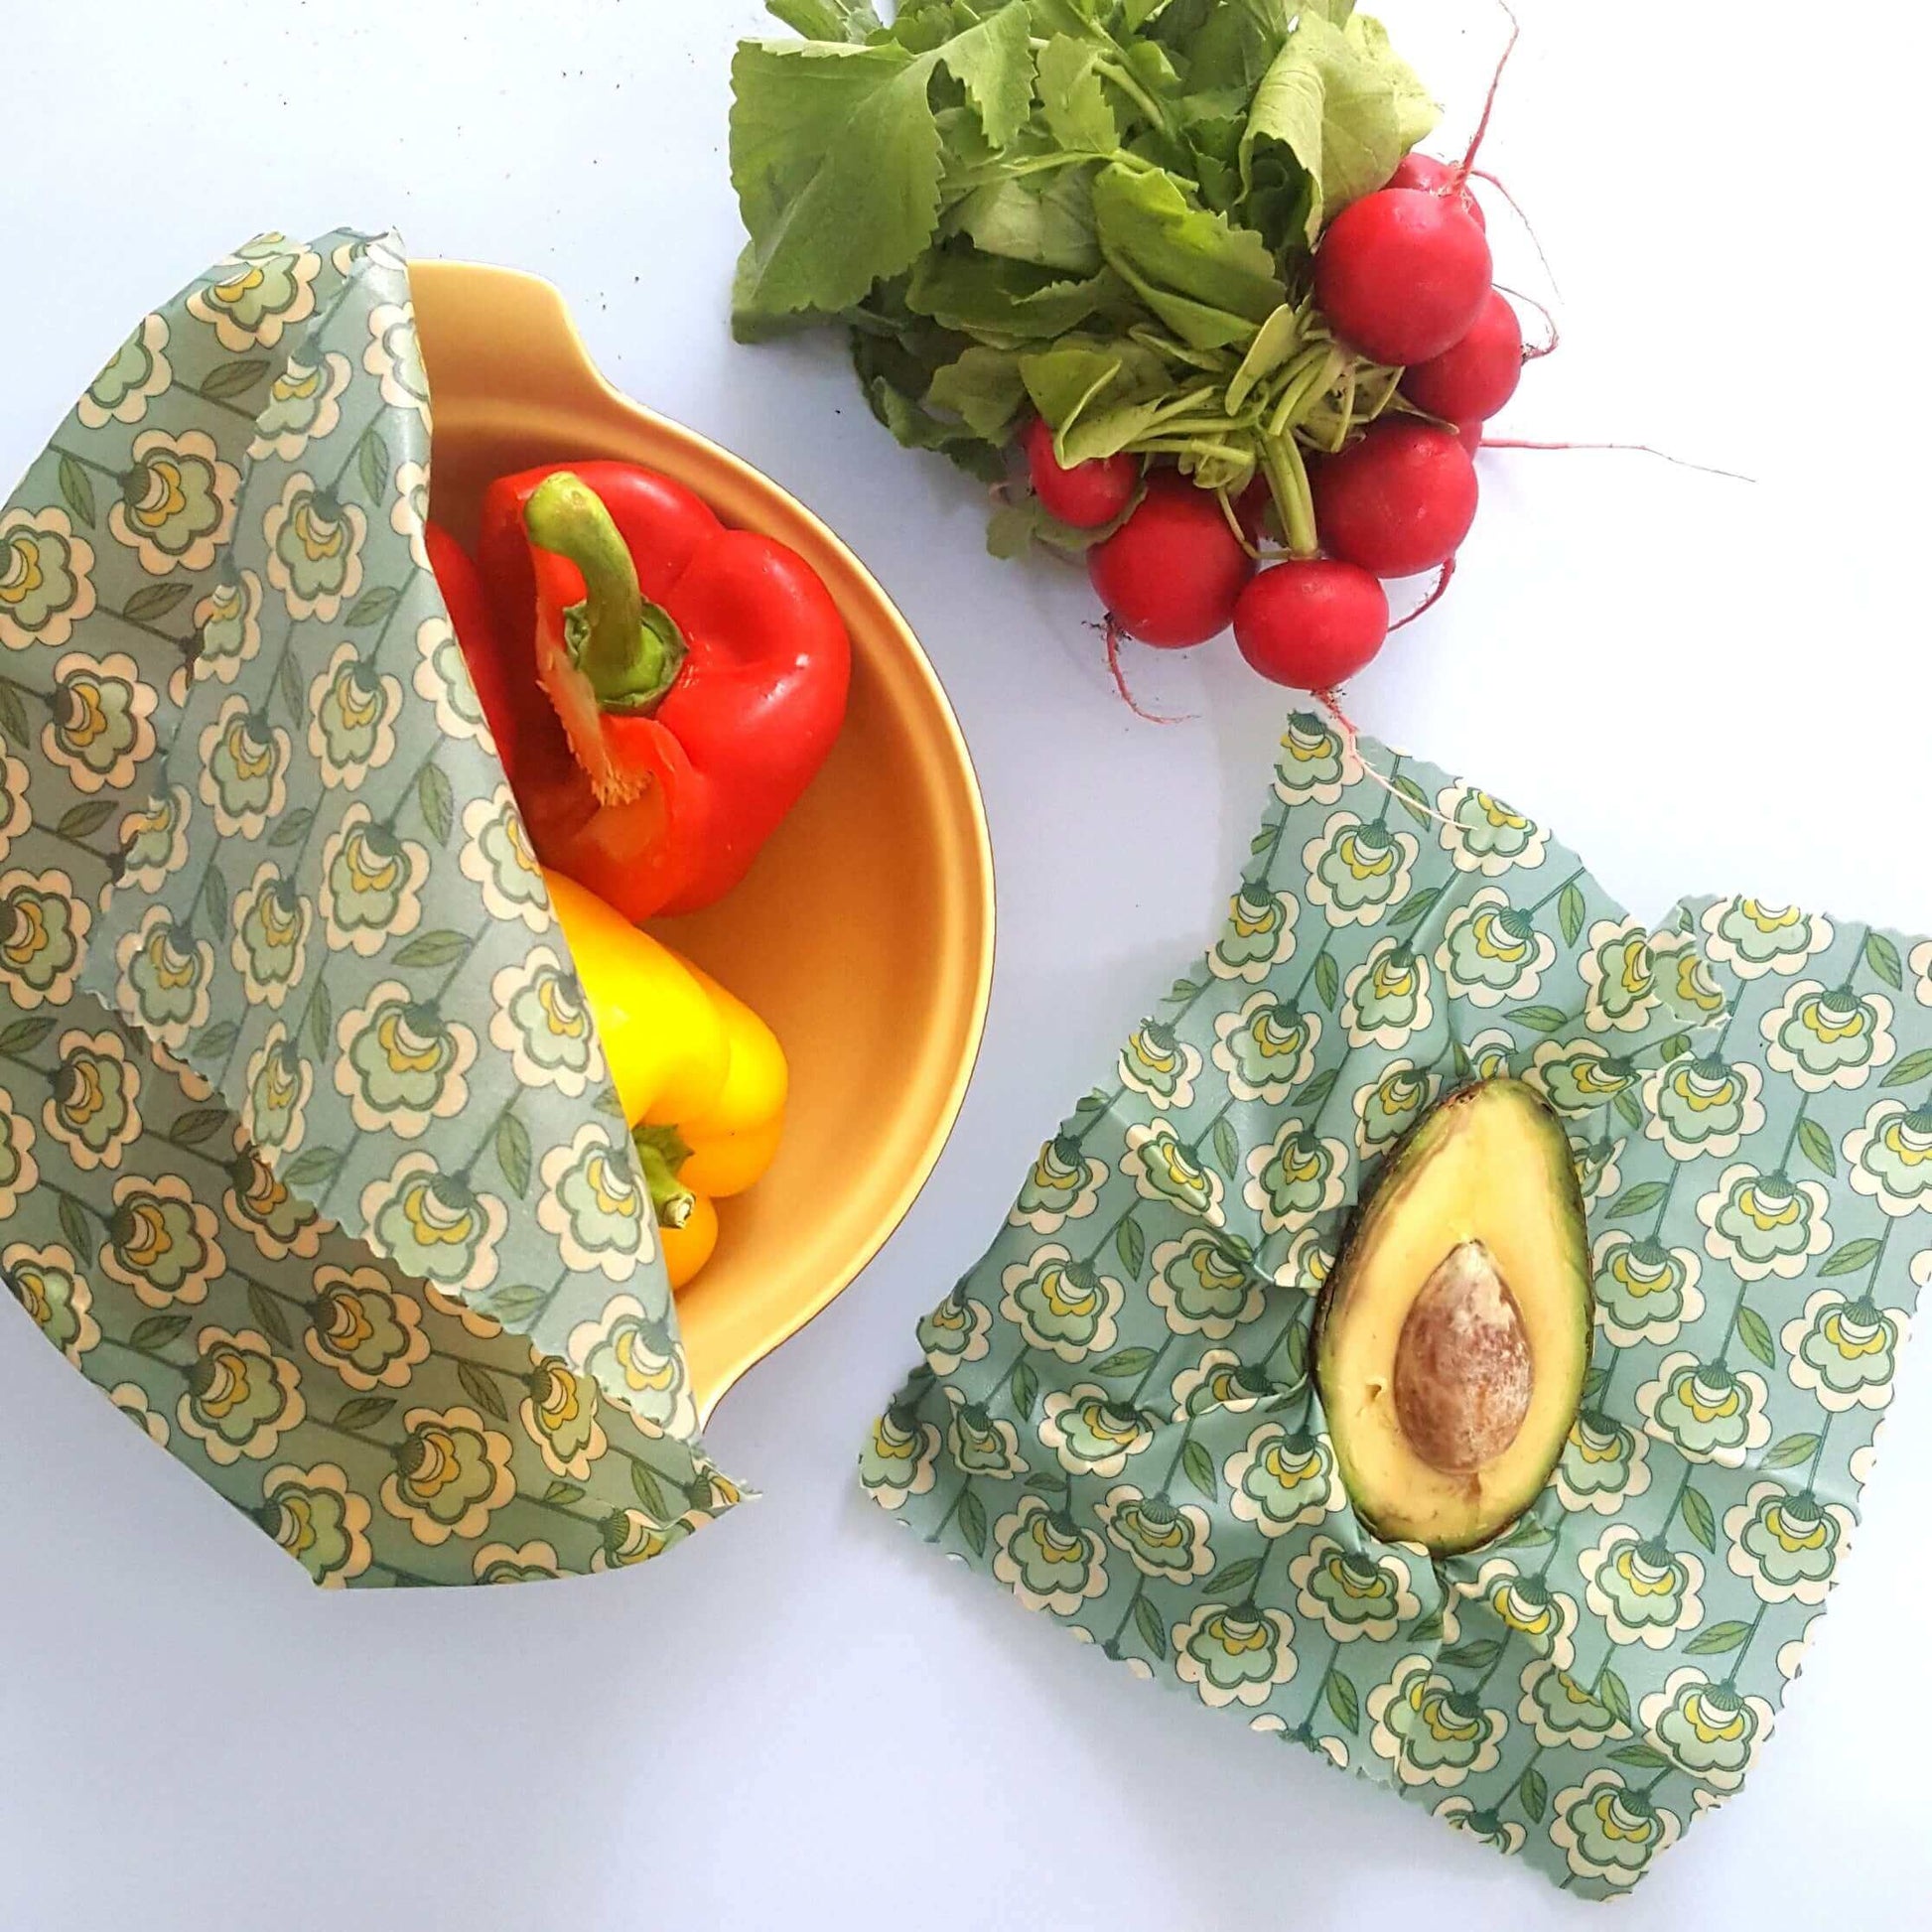 Reusable Beeswax Food Wraps 100% Hand Made in the UK by Honey Bee Good shown in Classic Mod Poppies Flatlay